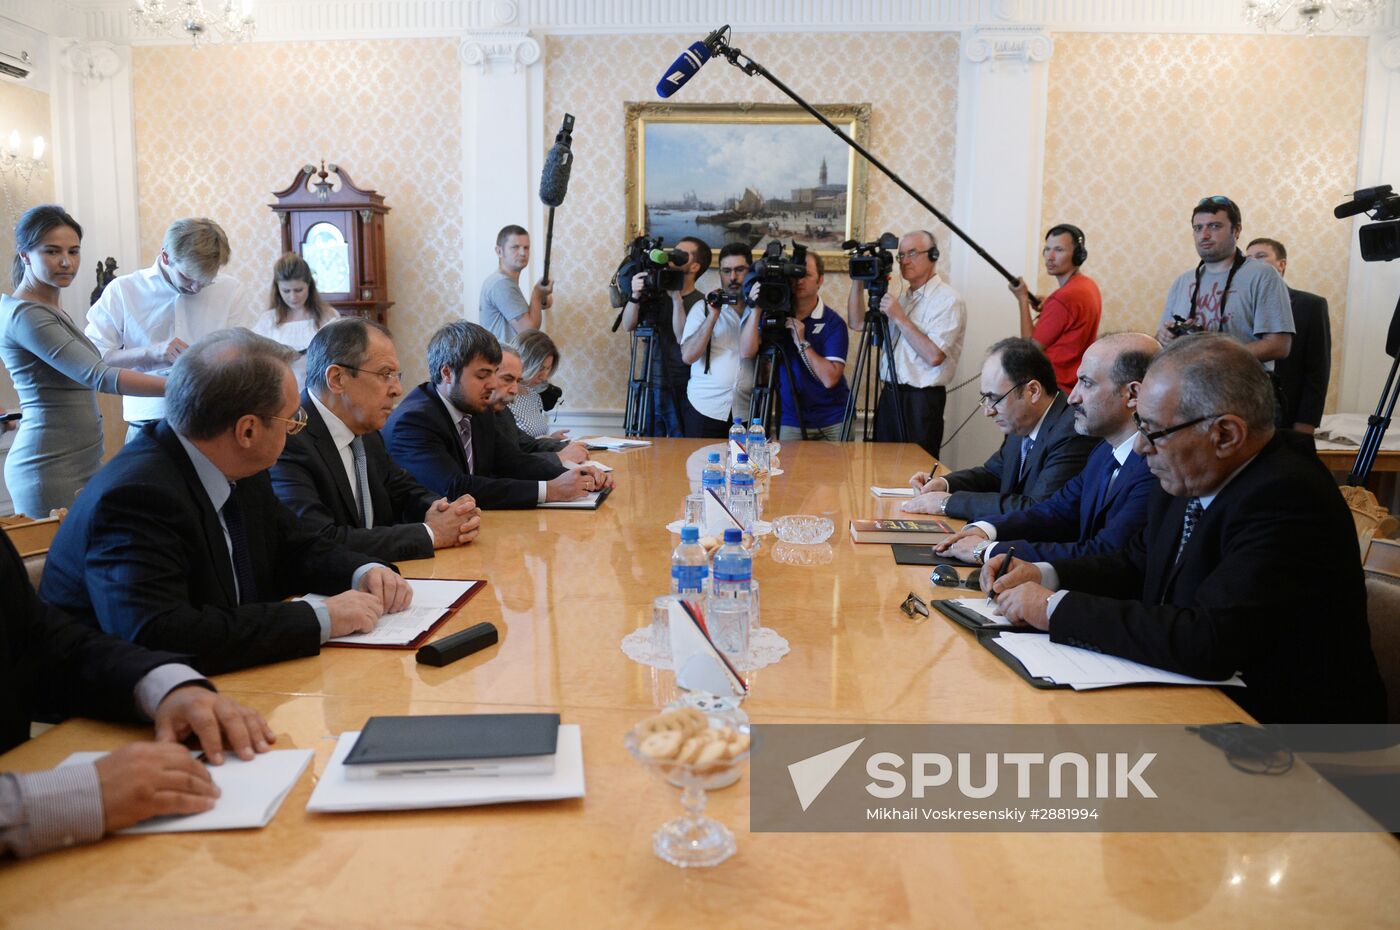 Sergei Lavrov meets with Syrian opposition delegation led by Ahmad al-Jarba